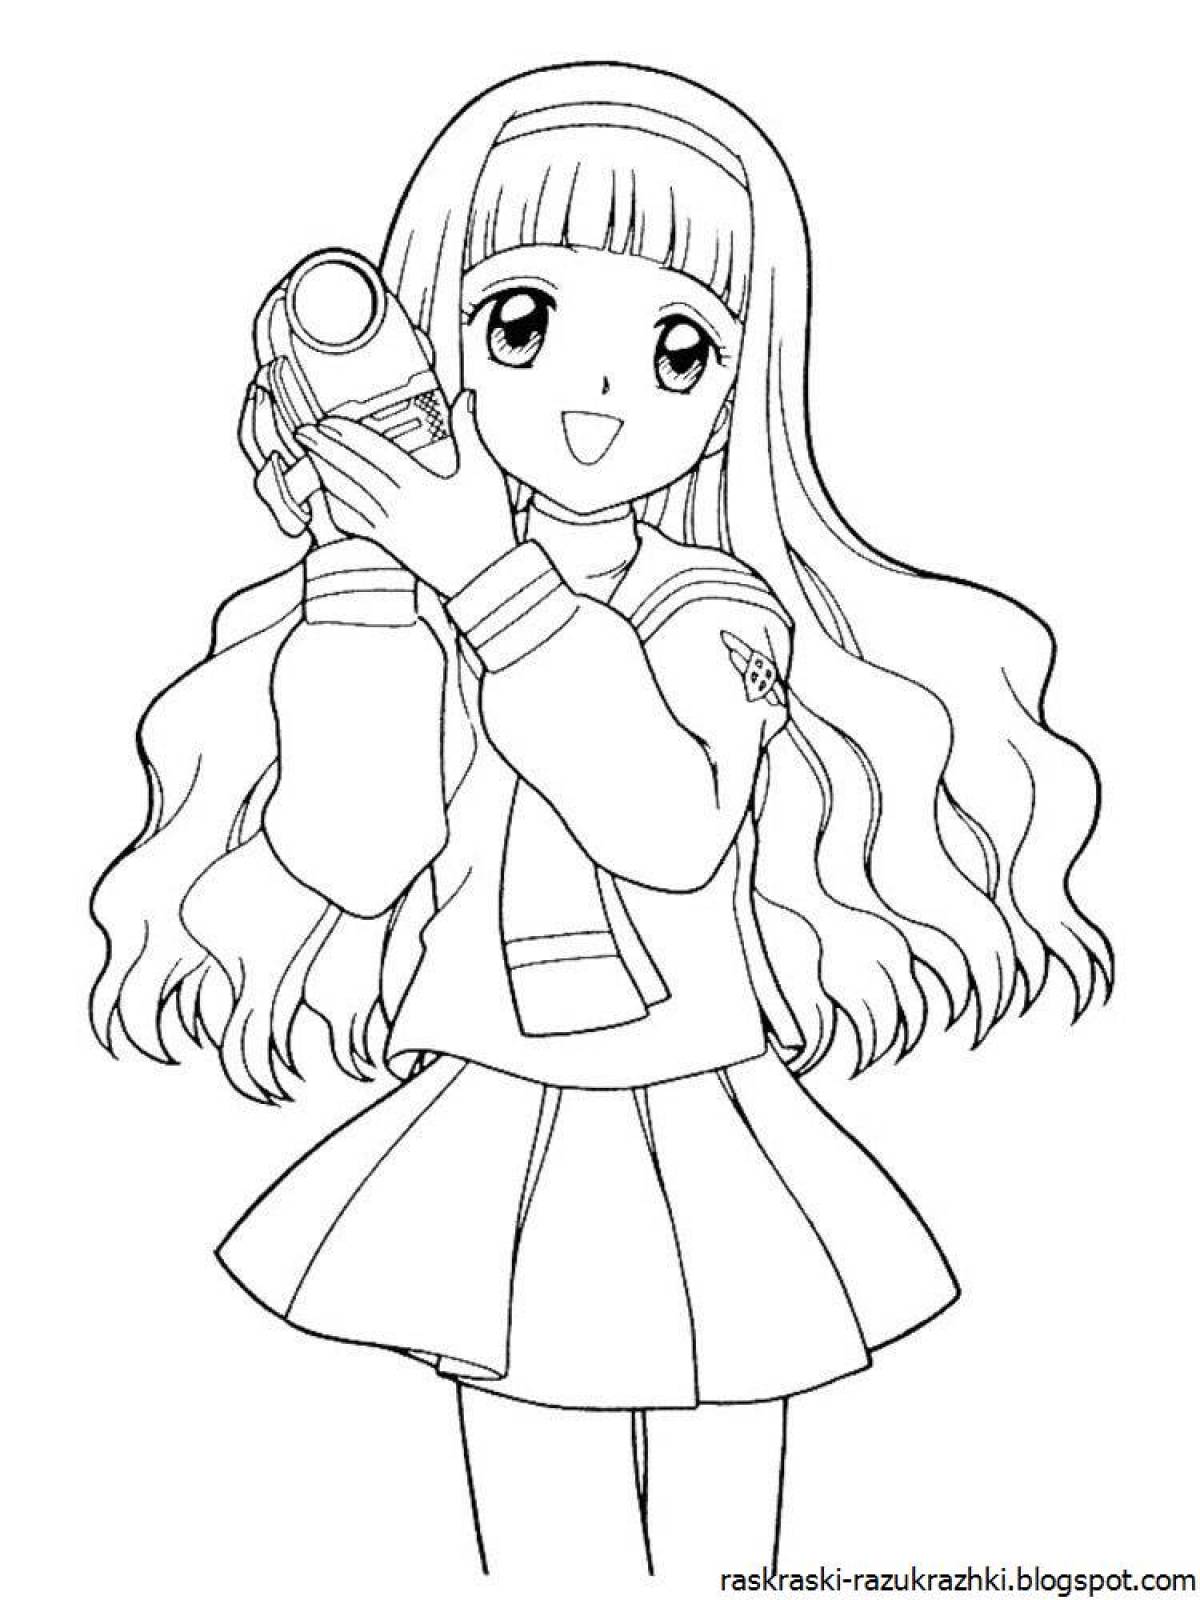 Enticing coloring pages for girls 12 years old anime